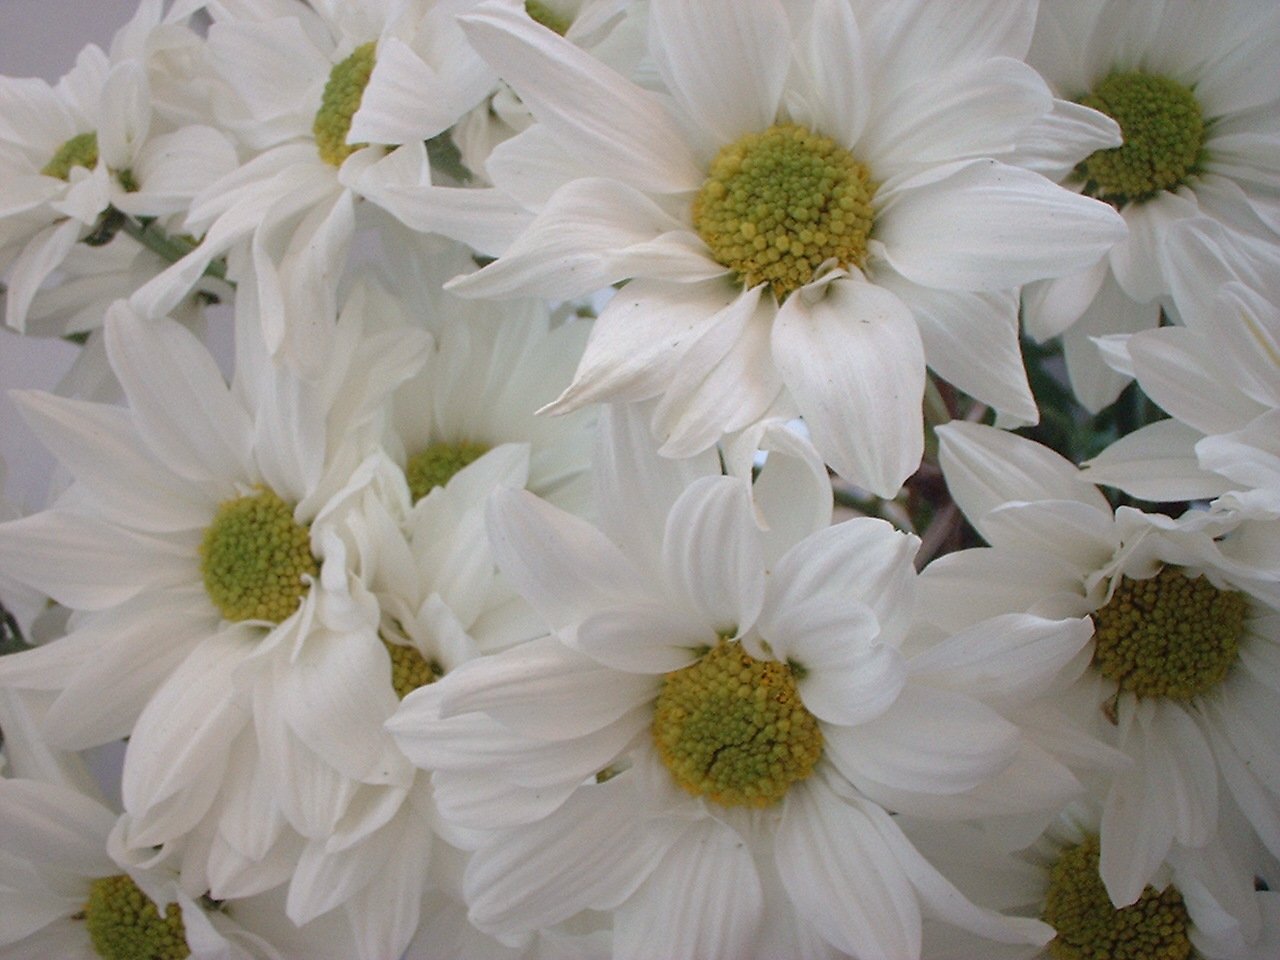 this close - up image shows the large, white flowers